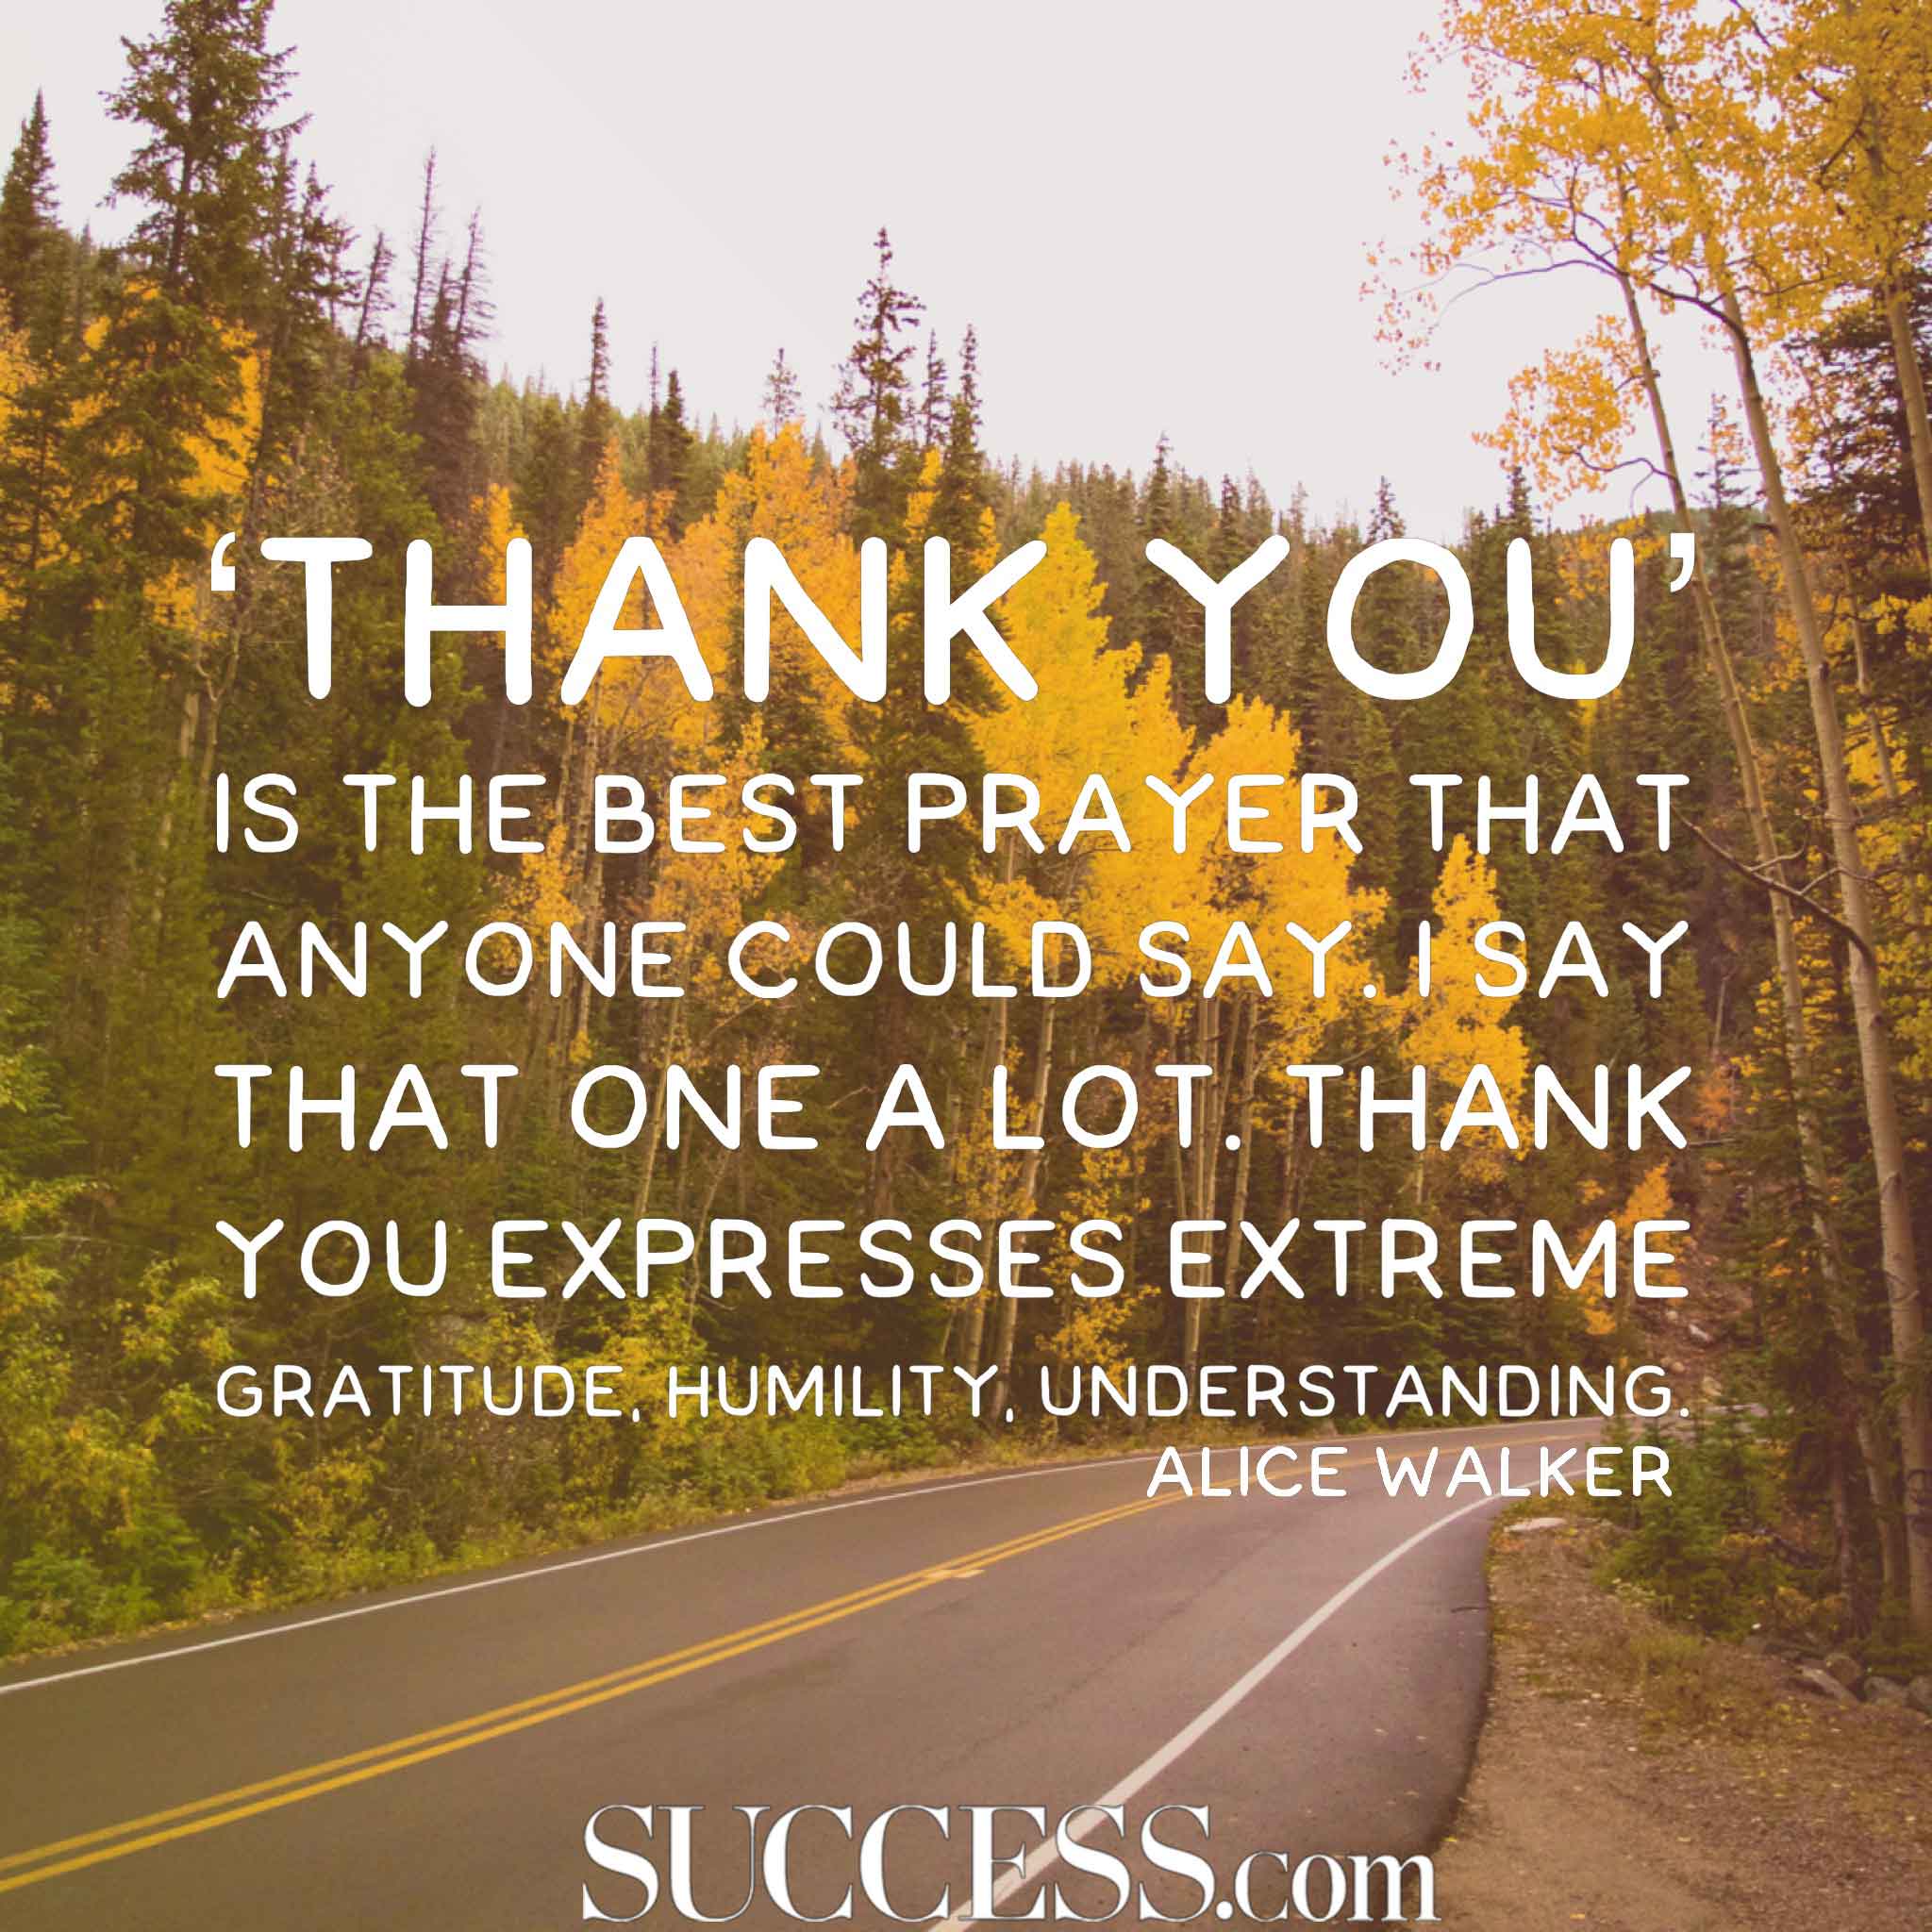 ‘Thank you’ is the best prayer that anyone could say. I say that one a lot. Thank you expresses extreme gratitude, humility, understanding. – Alice Walker